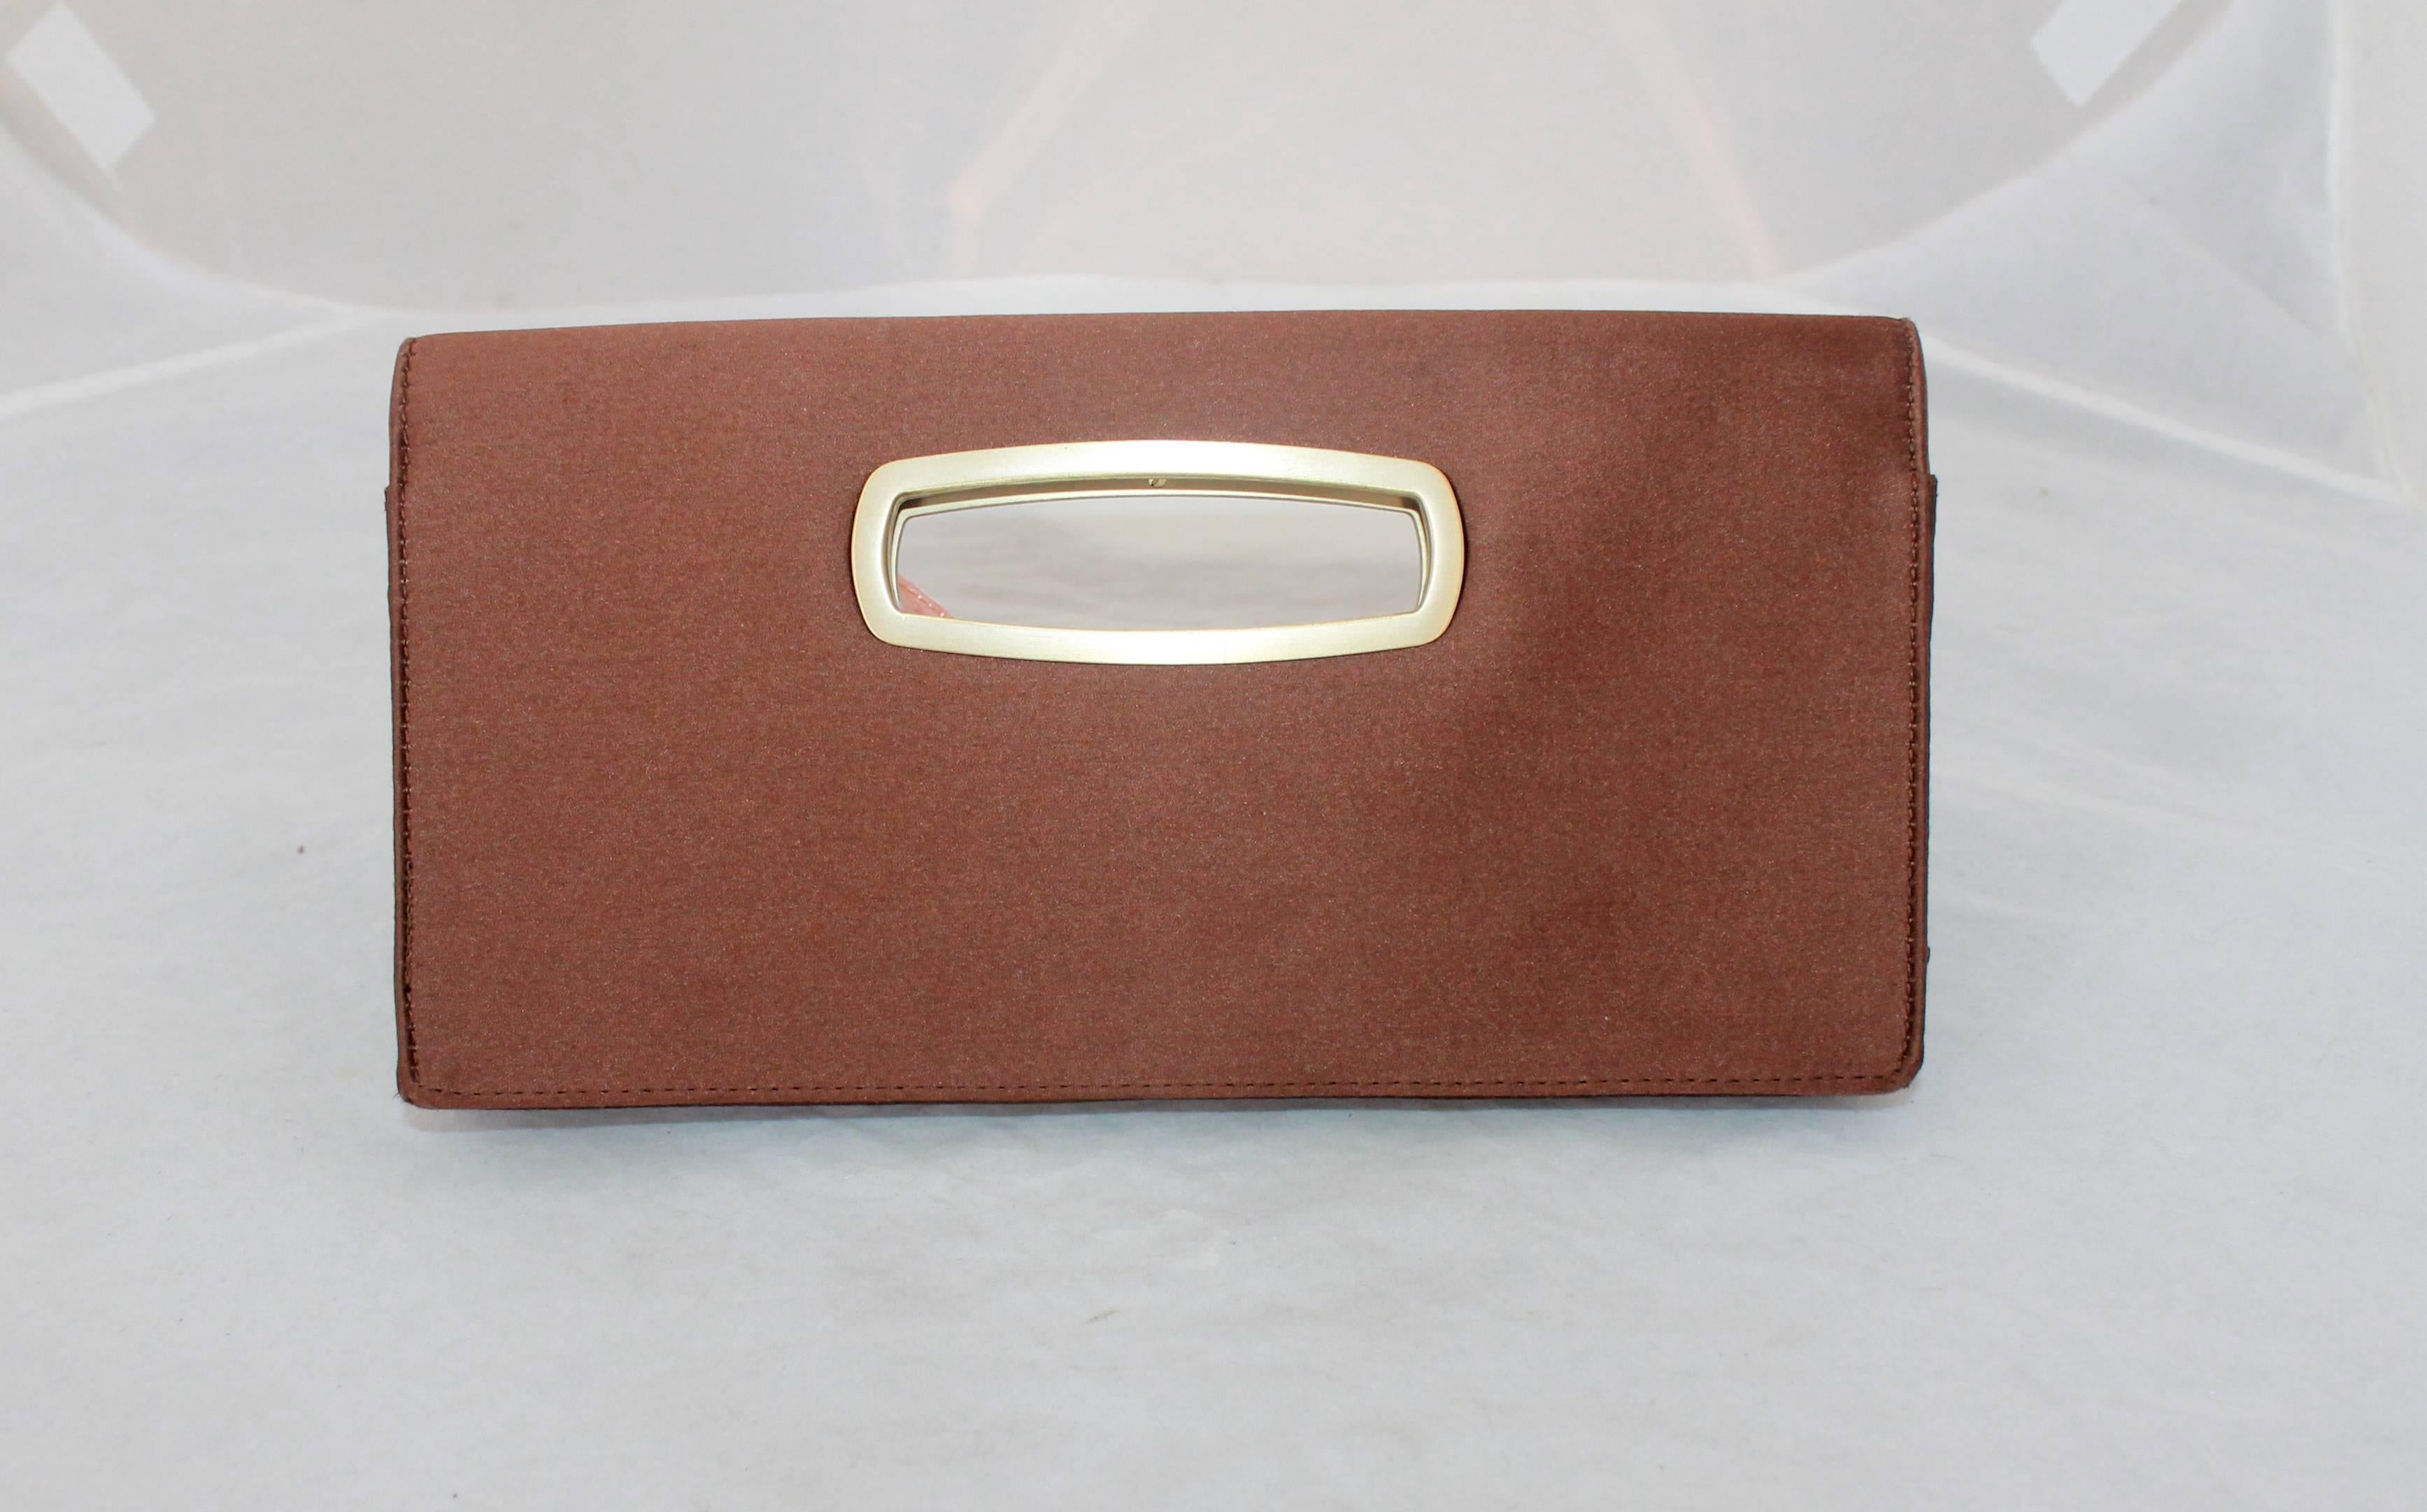 Jimmy Choo Brown Satin Clutch with Gold Cutout Handle. This clutch is in very good condition with minor areas wear on both sides. It is a foldover clutch and has a magnetic clasp. The gold cutout has the Jimmy Choo logo in the center on the